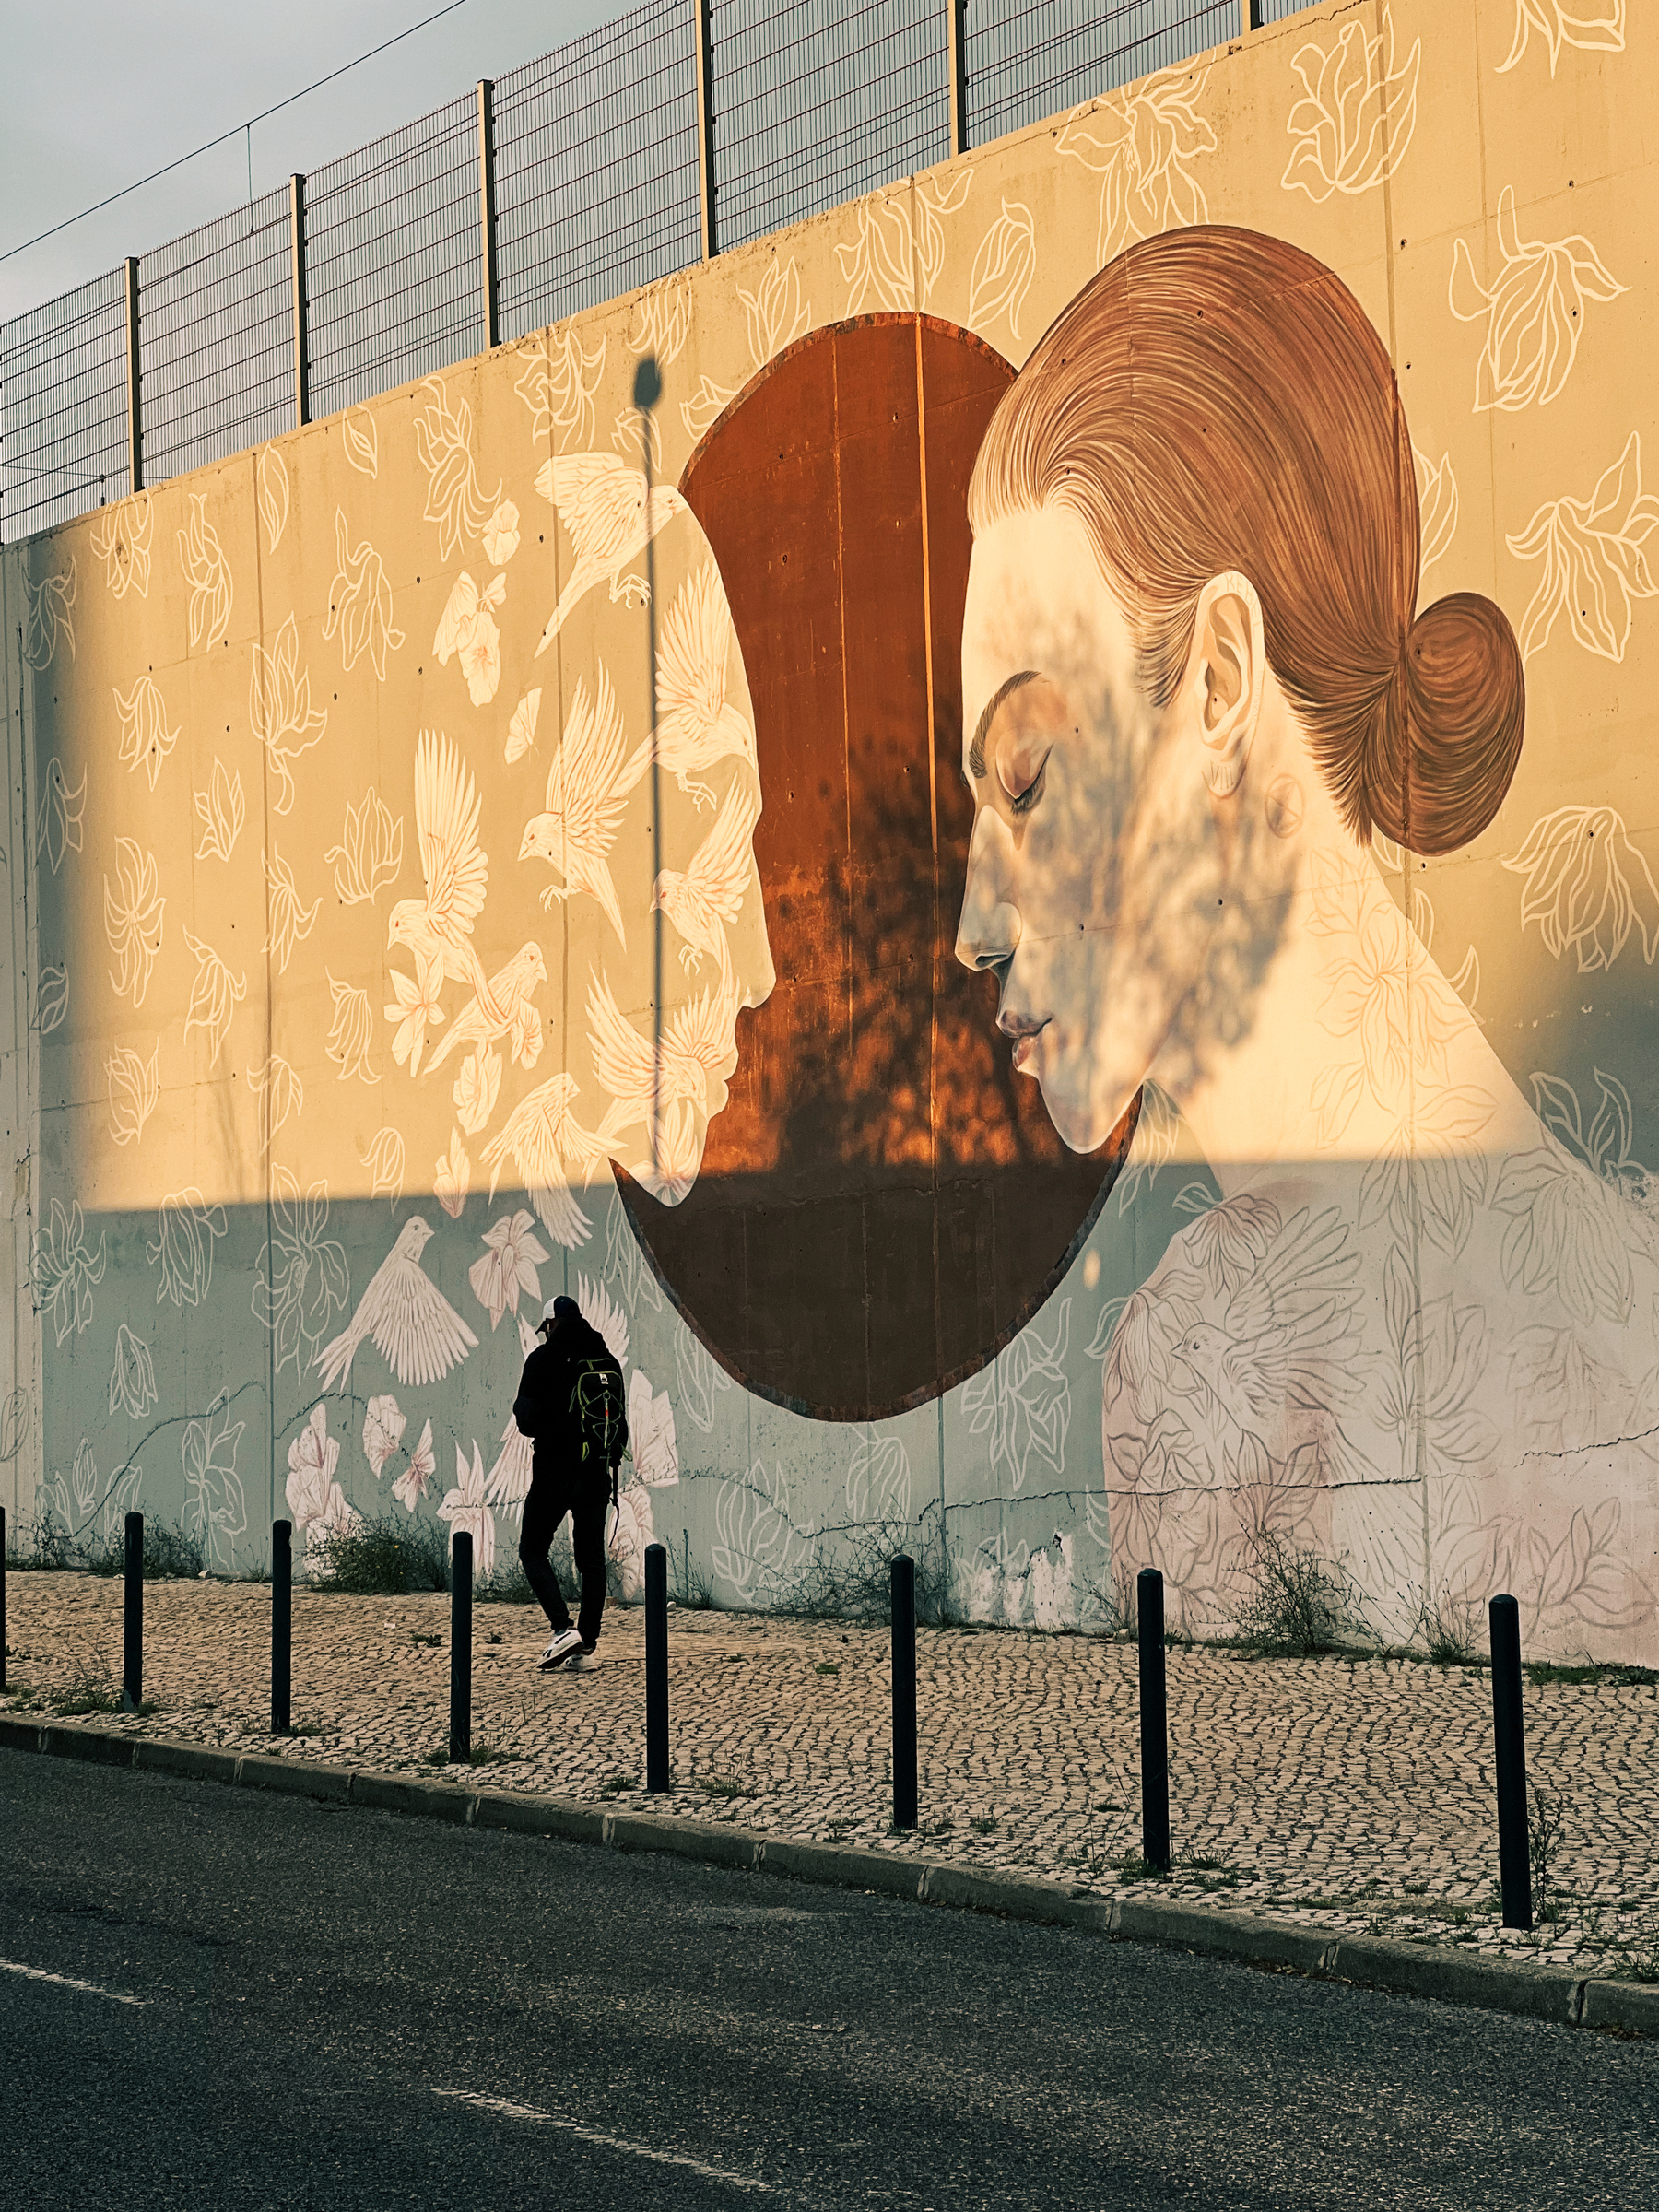 Street art. Two women, looking at each other.